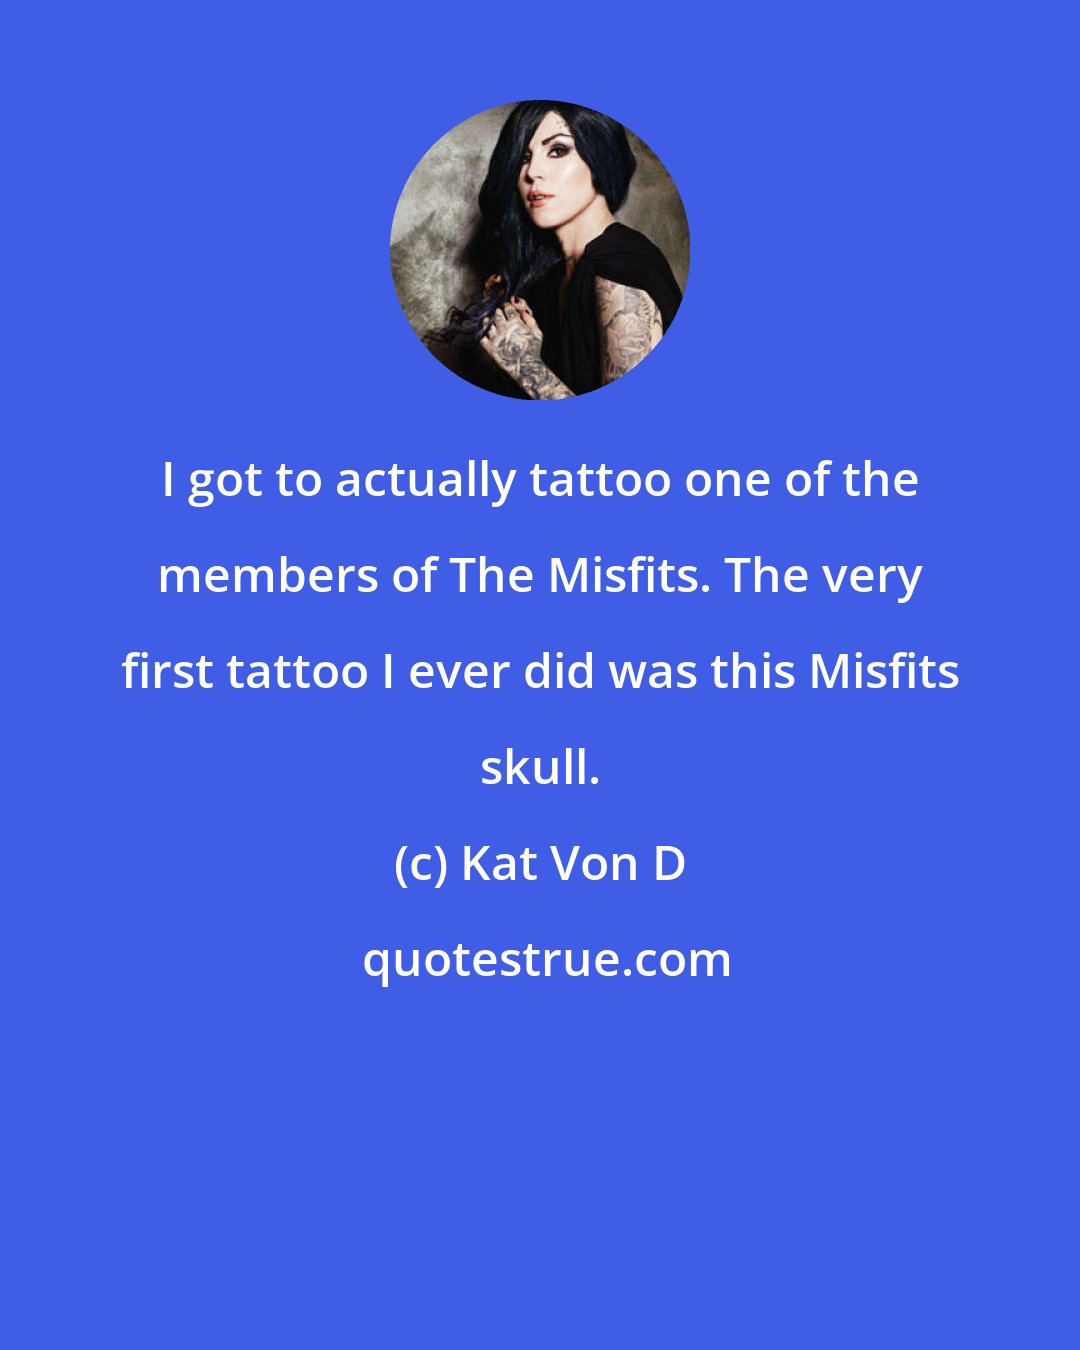 Kat Von D: I got to actually tattoo one of the members of The Misfits. The very first tattoo I ever did was this Misfits skull.